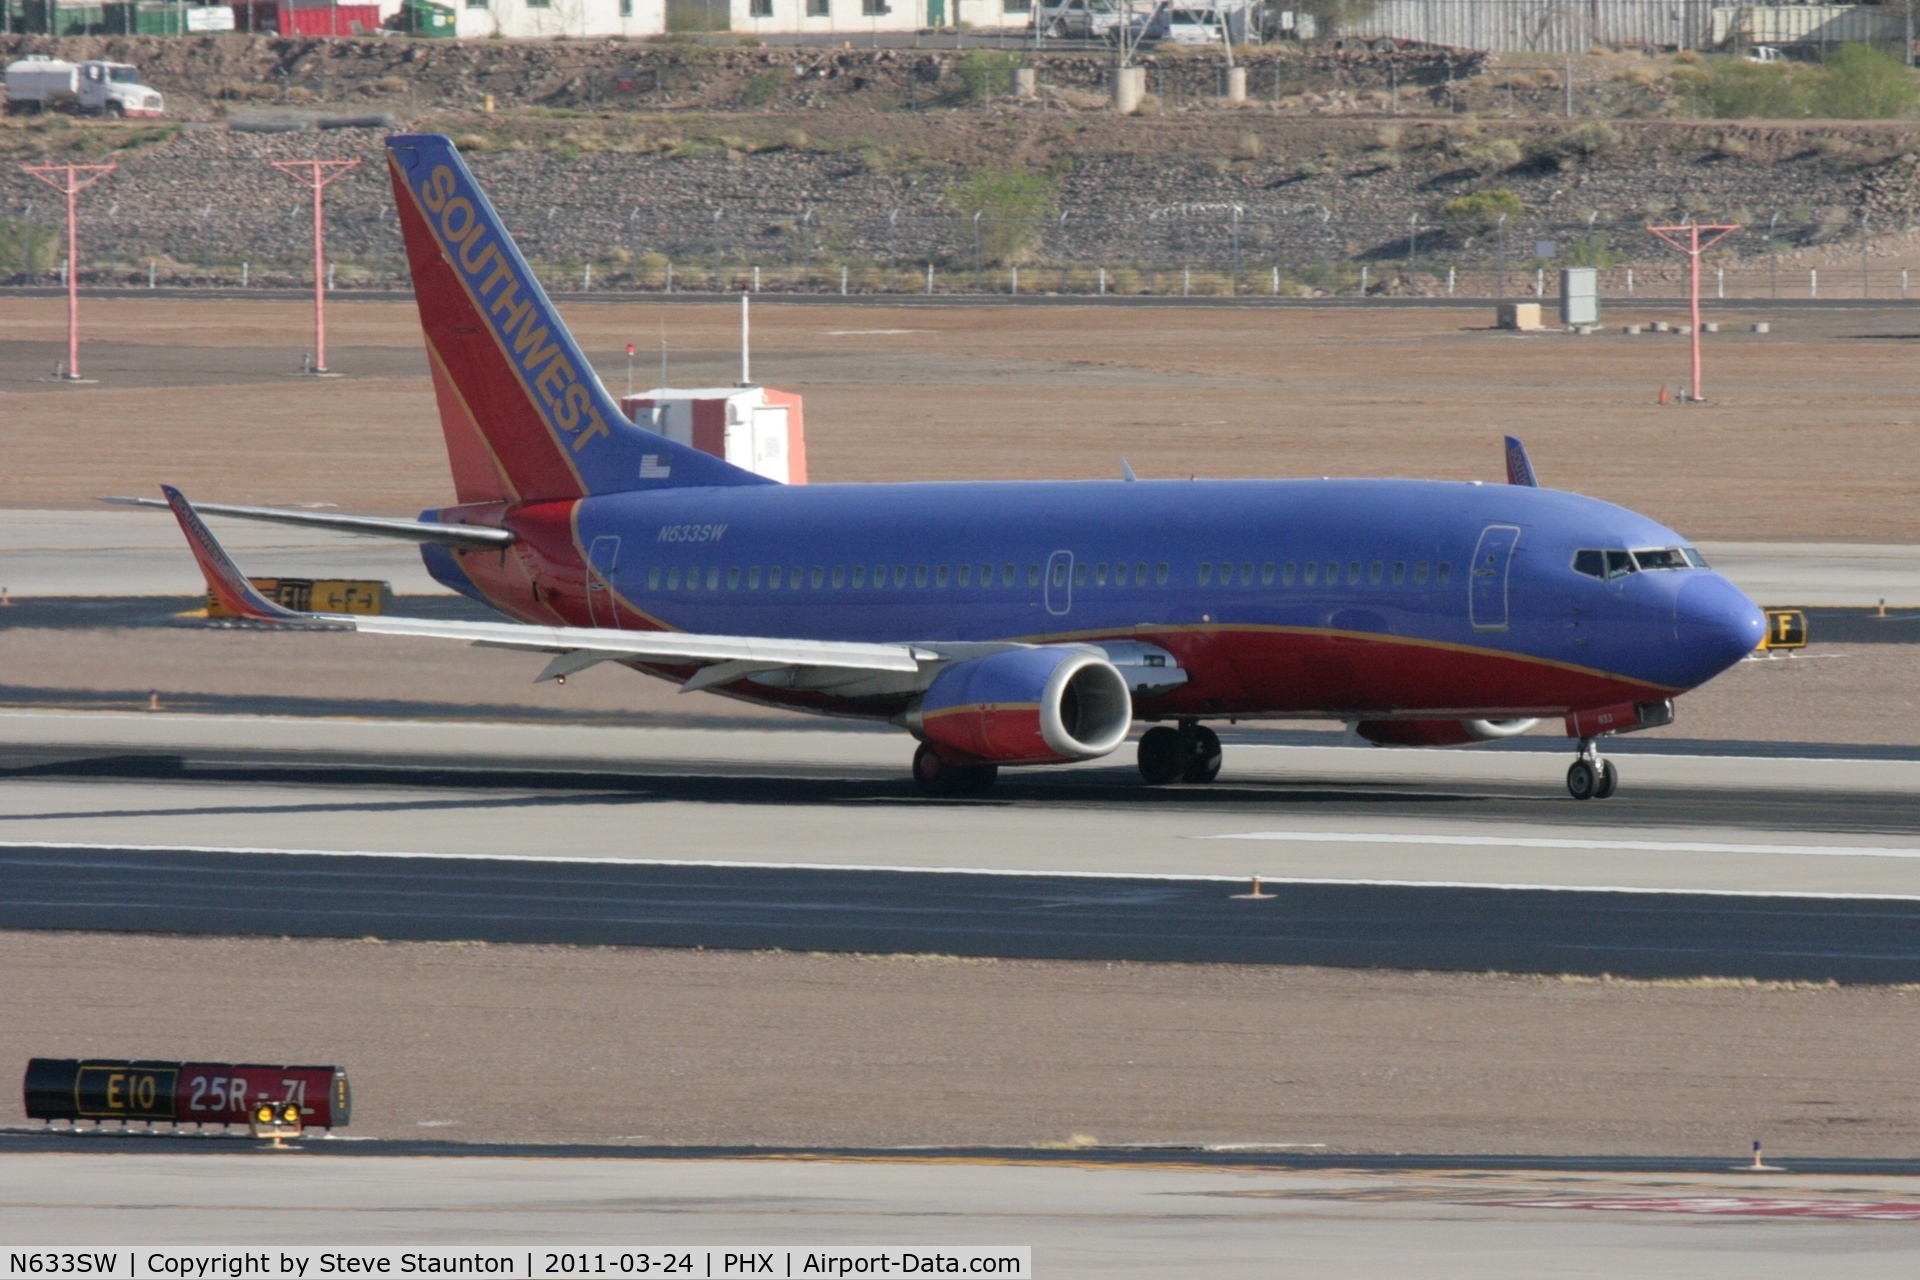 N633SW, 1996 Boeing 737-3H4 C/N 27936, Taken at Phoenix Sky Harbor Airport, in March 2011 whilst on an Aeroprint Aviation tour